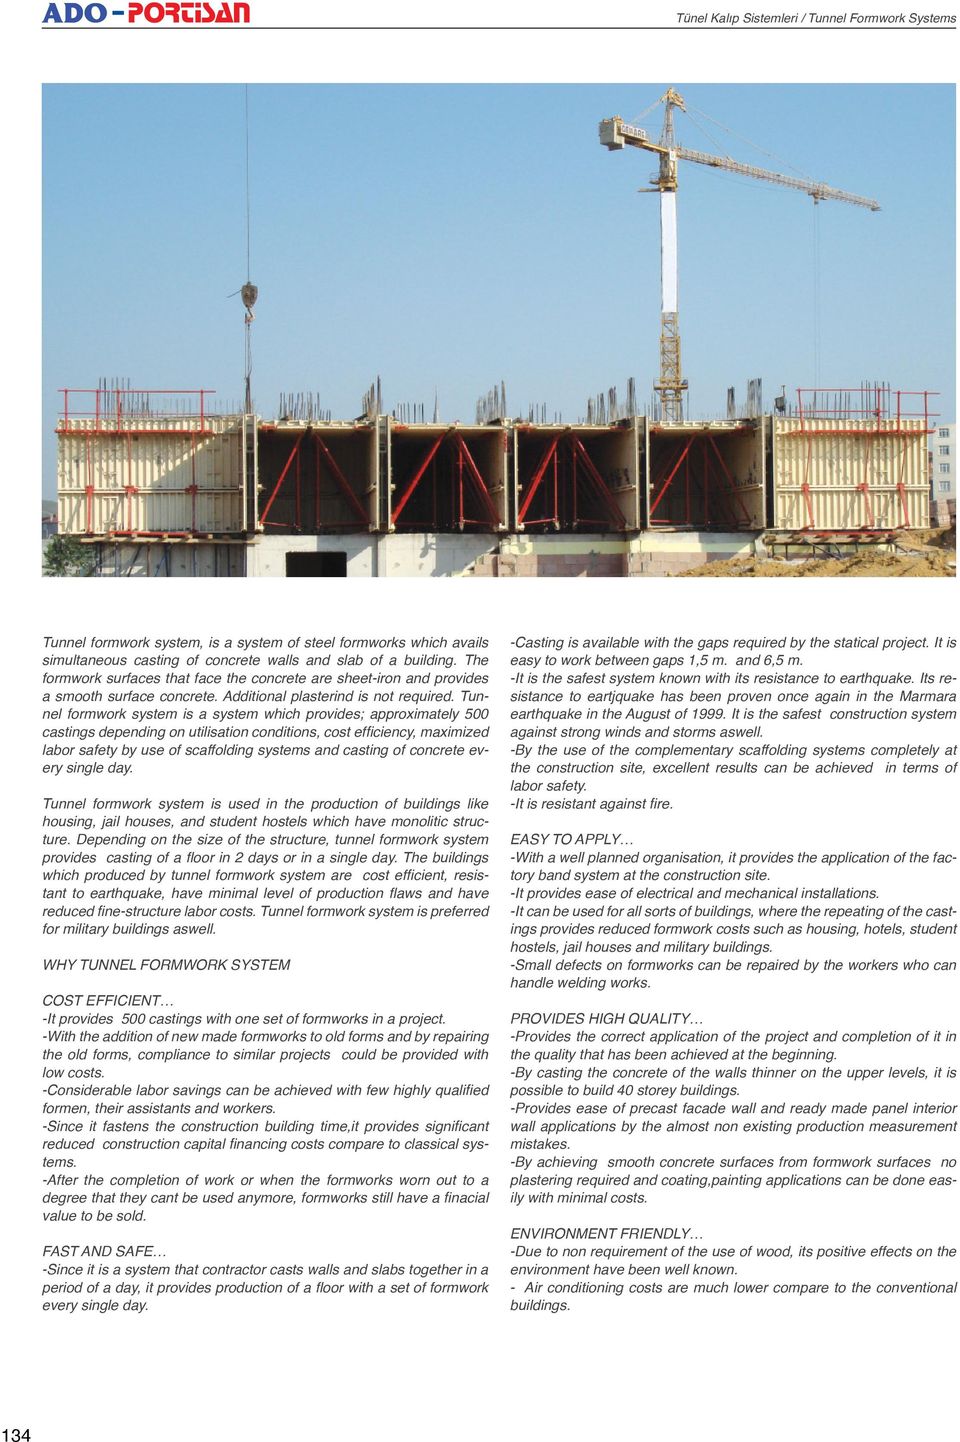 Tunnel formwork system is a system which provides; approximately 500 castings depending on utilisation conditions, cost ef ciency, maximized labor safety by use of scaffolding systems and casting of